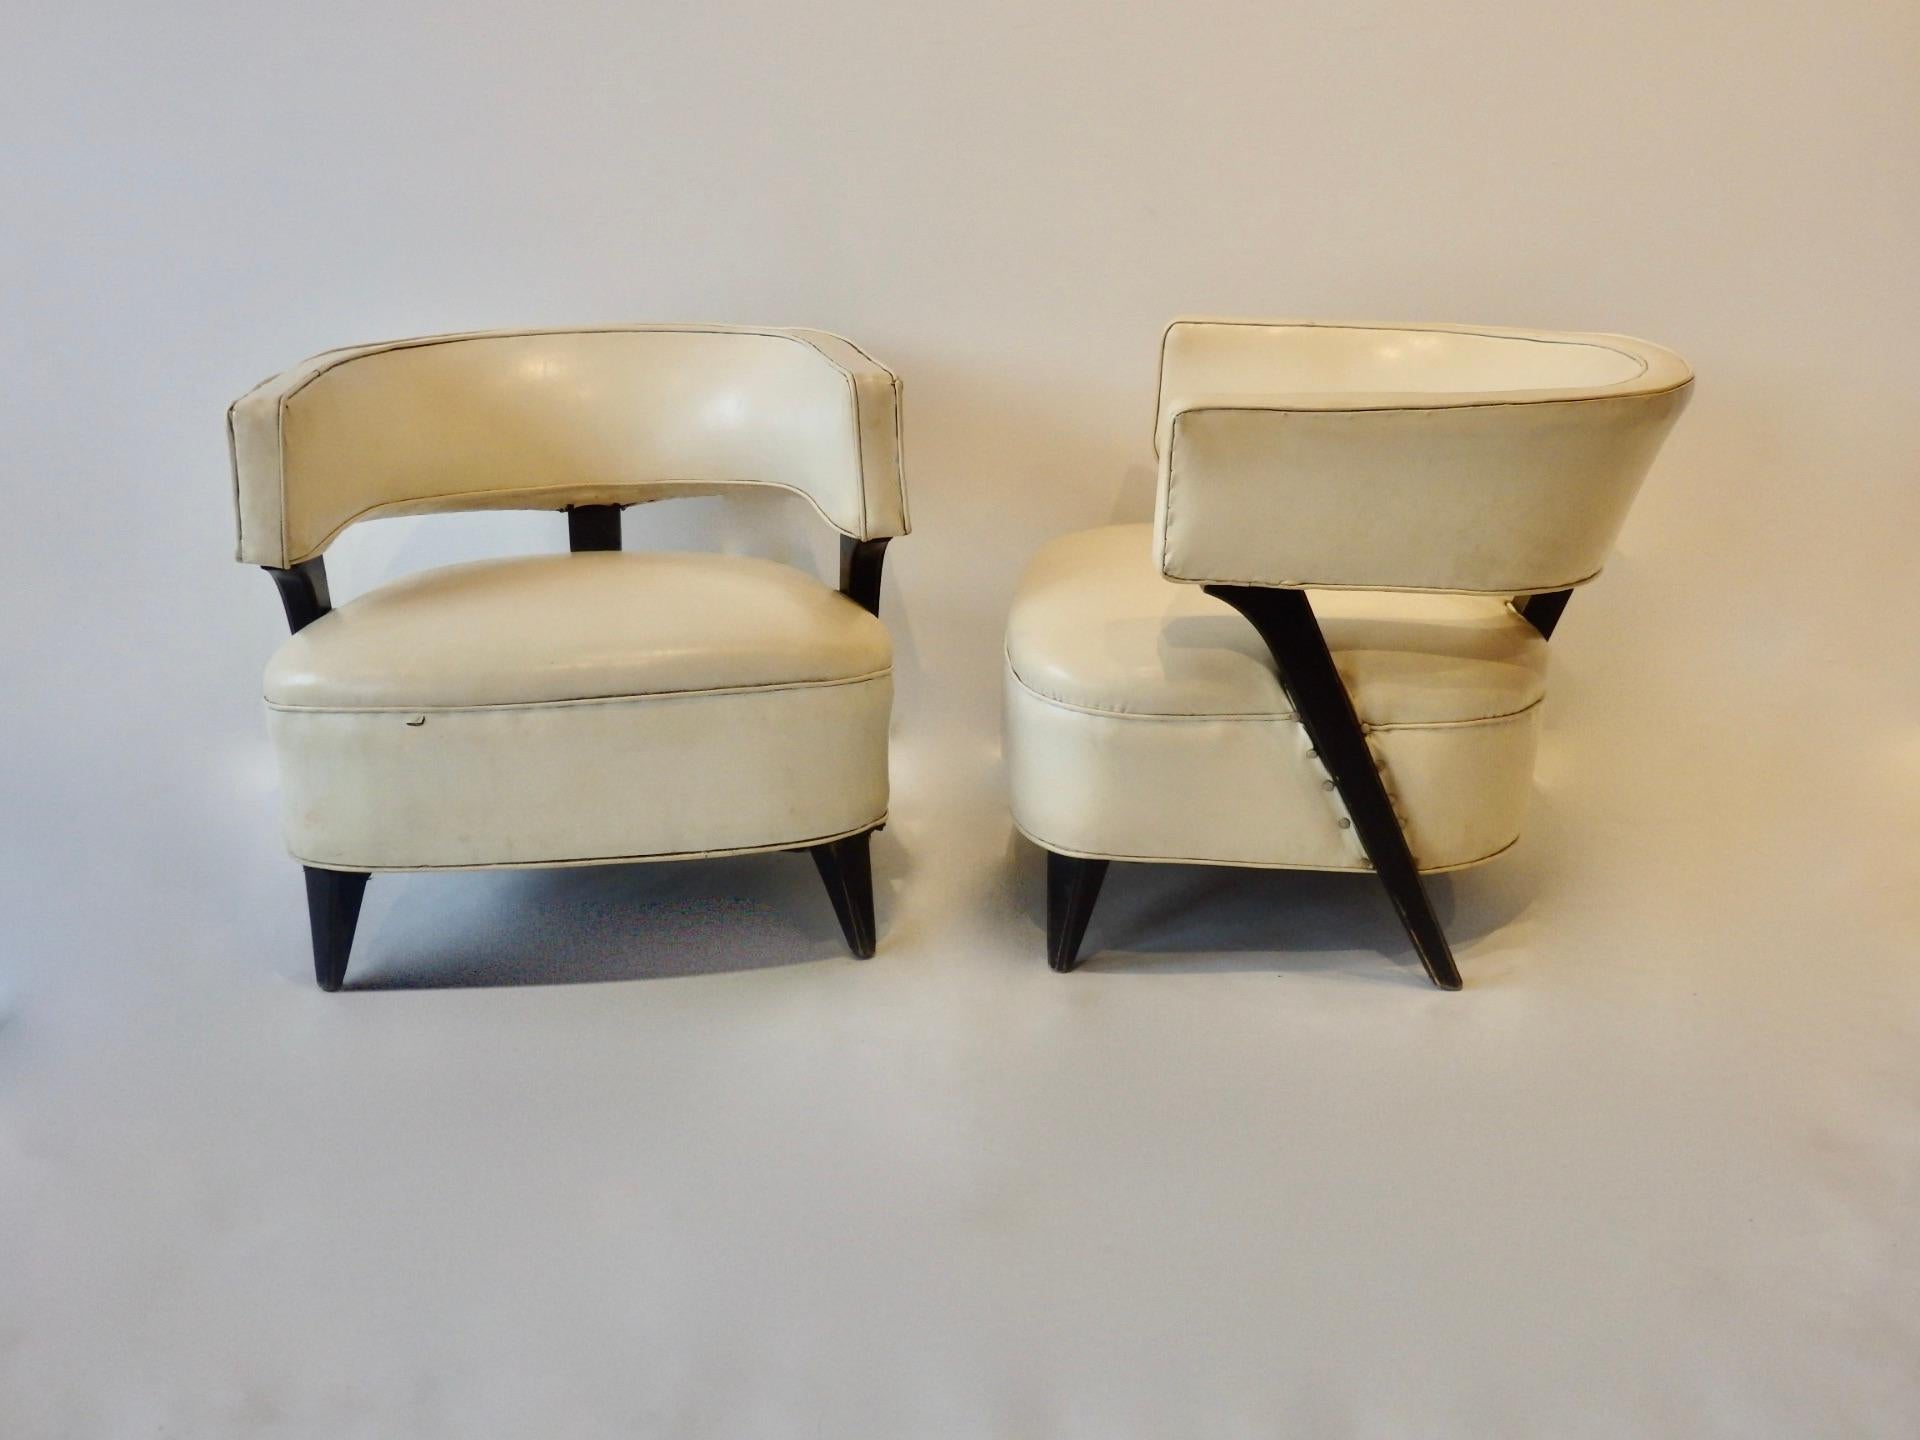 20th Century Pair of as Found Paul Laszlo Style Art Deco Moderne Club or Lounge Chairs